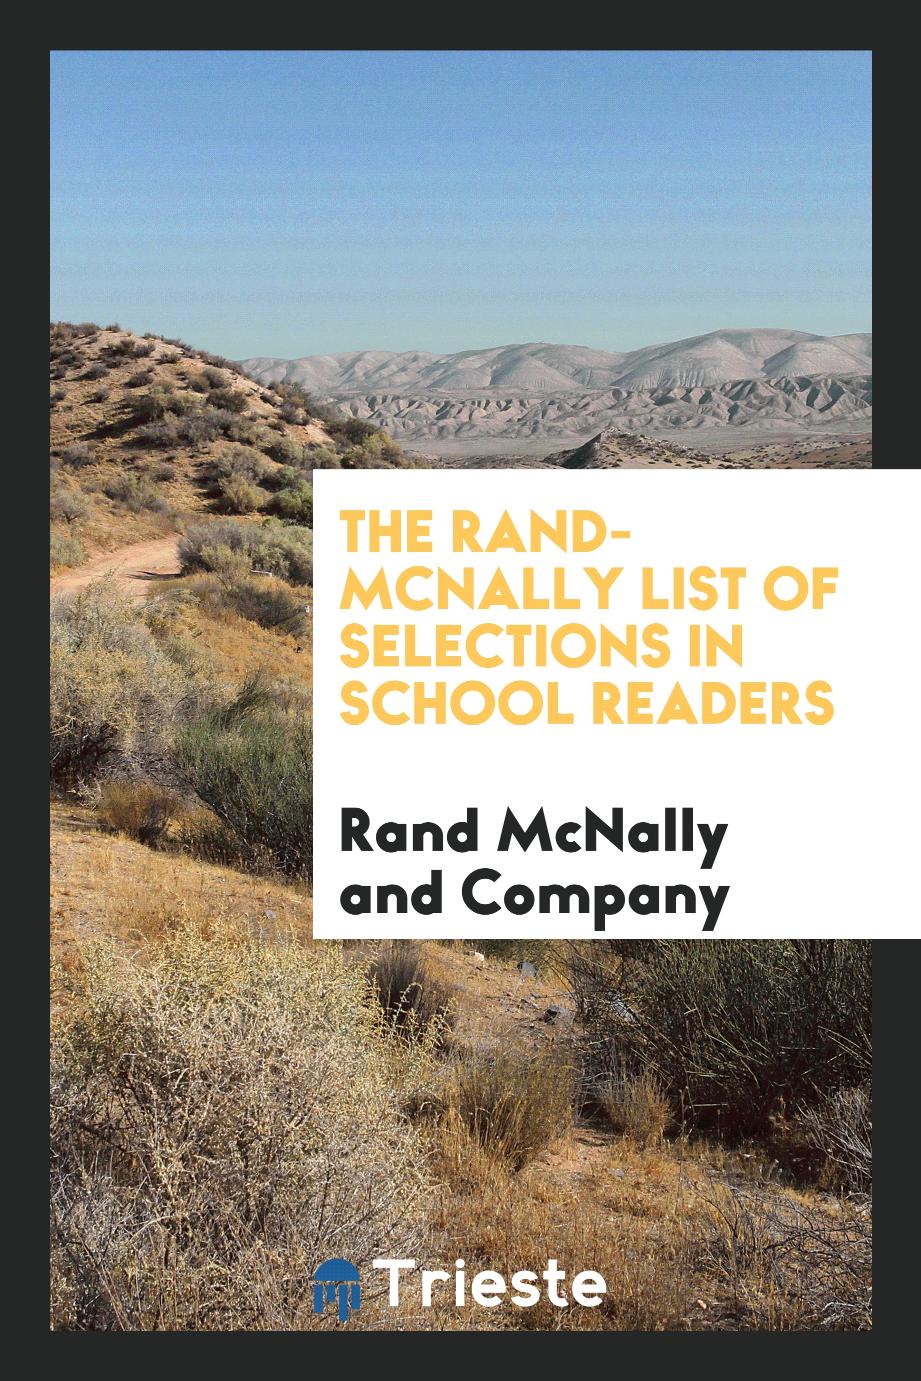 The Rand-McNally List of Selections in School Readers